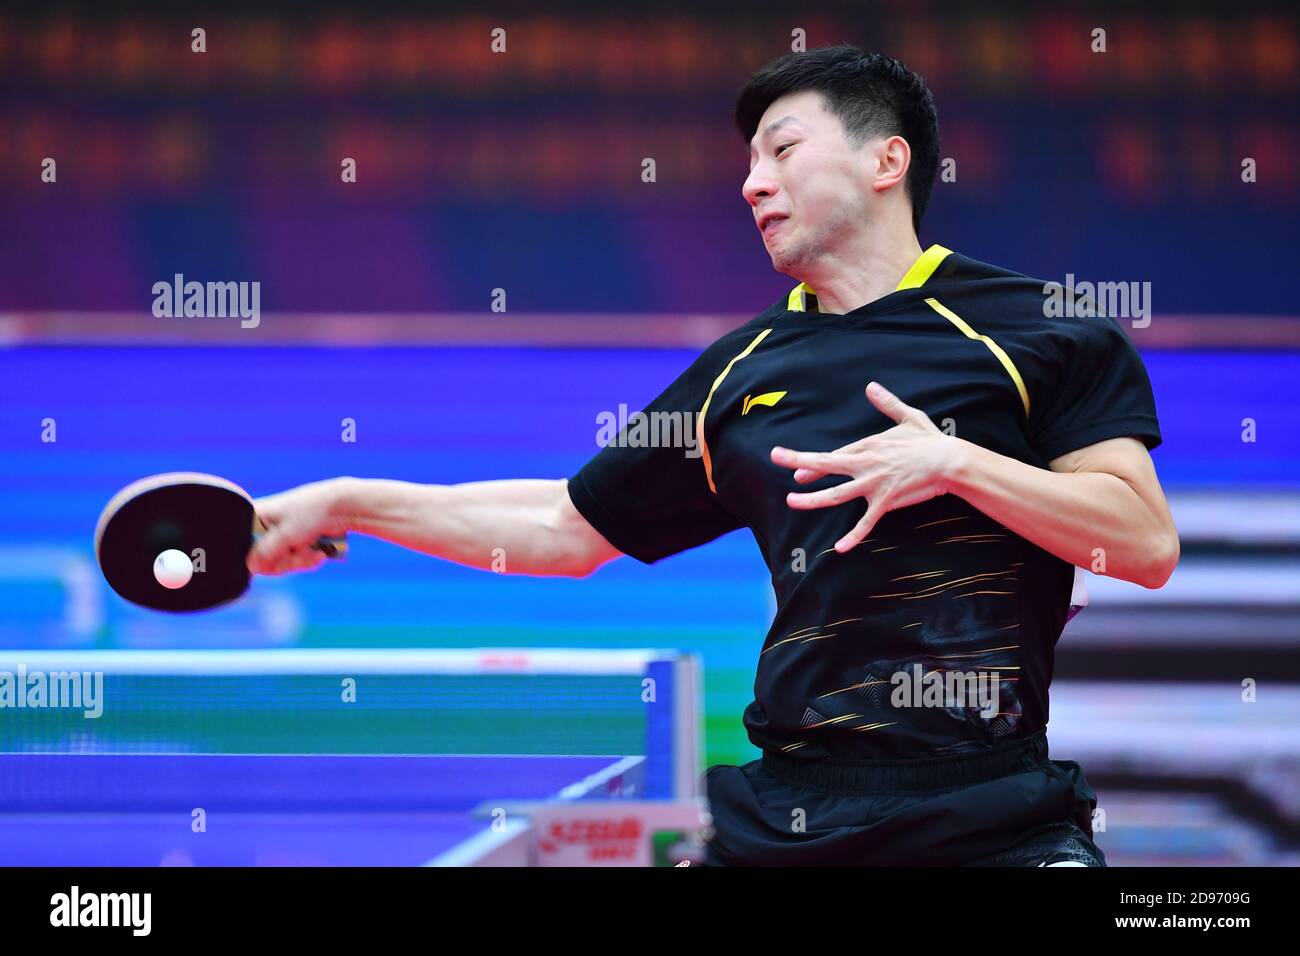 Chinese table tennis player Ma Long competes against Chinese table tennis player Fan Zhendong at the final of 2020 China National Table Tennis Championships, Weihai city, east China’s Shandong province, 10 October 2020. Stock Photo